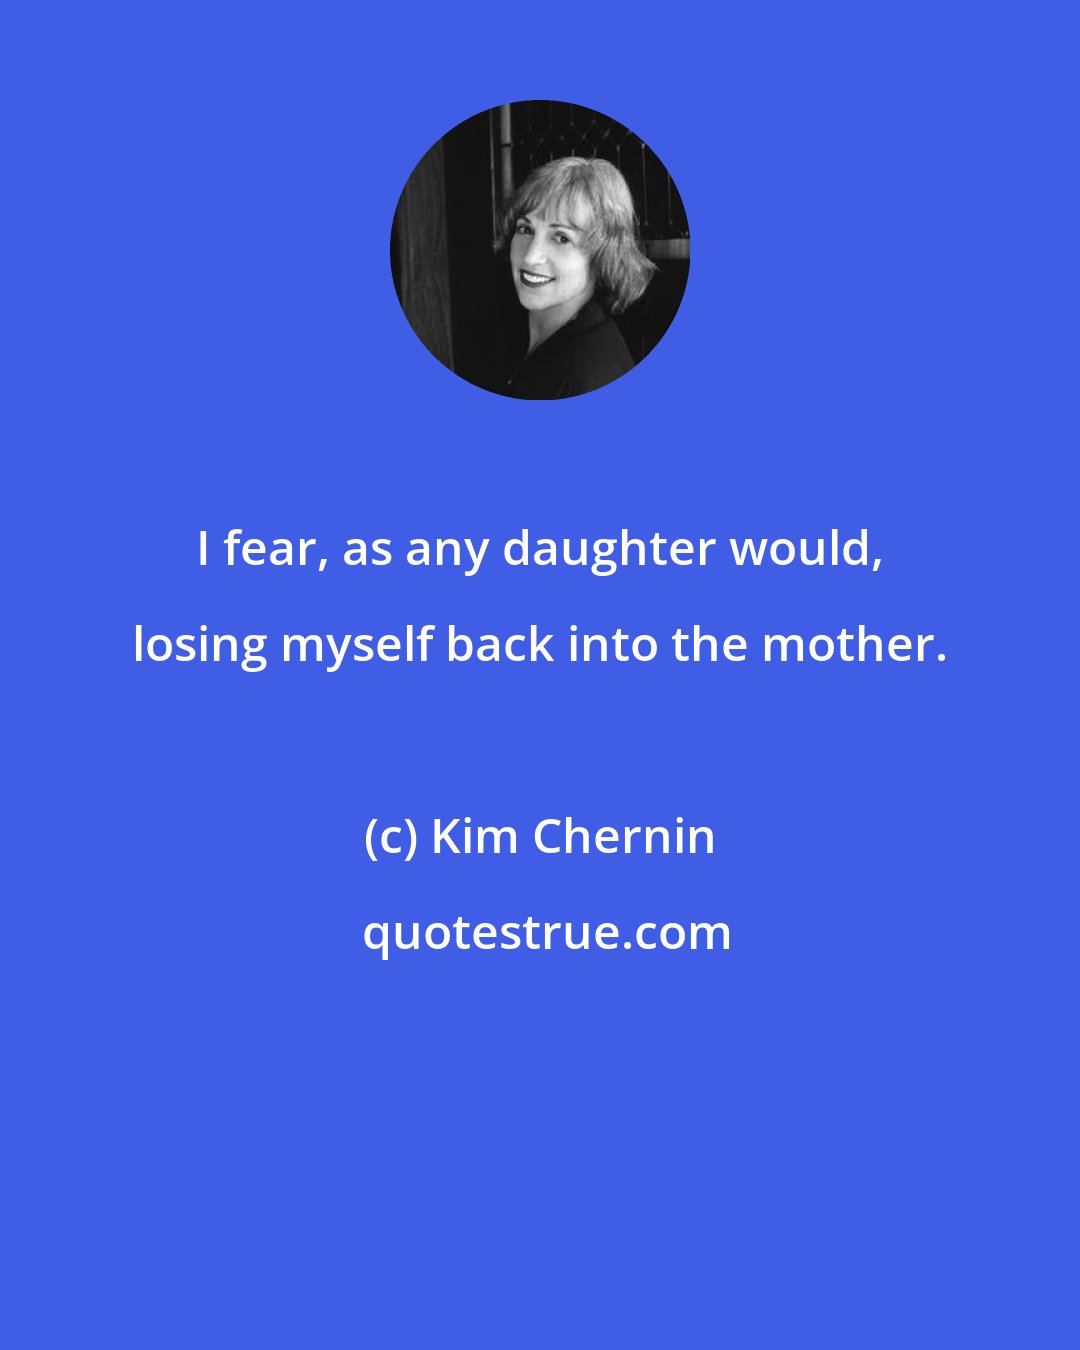 Kim Chernin: I fear, as any daughter would, losing myself back into the mother.